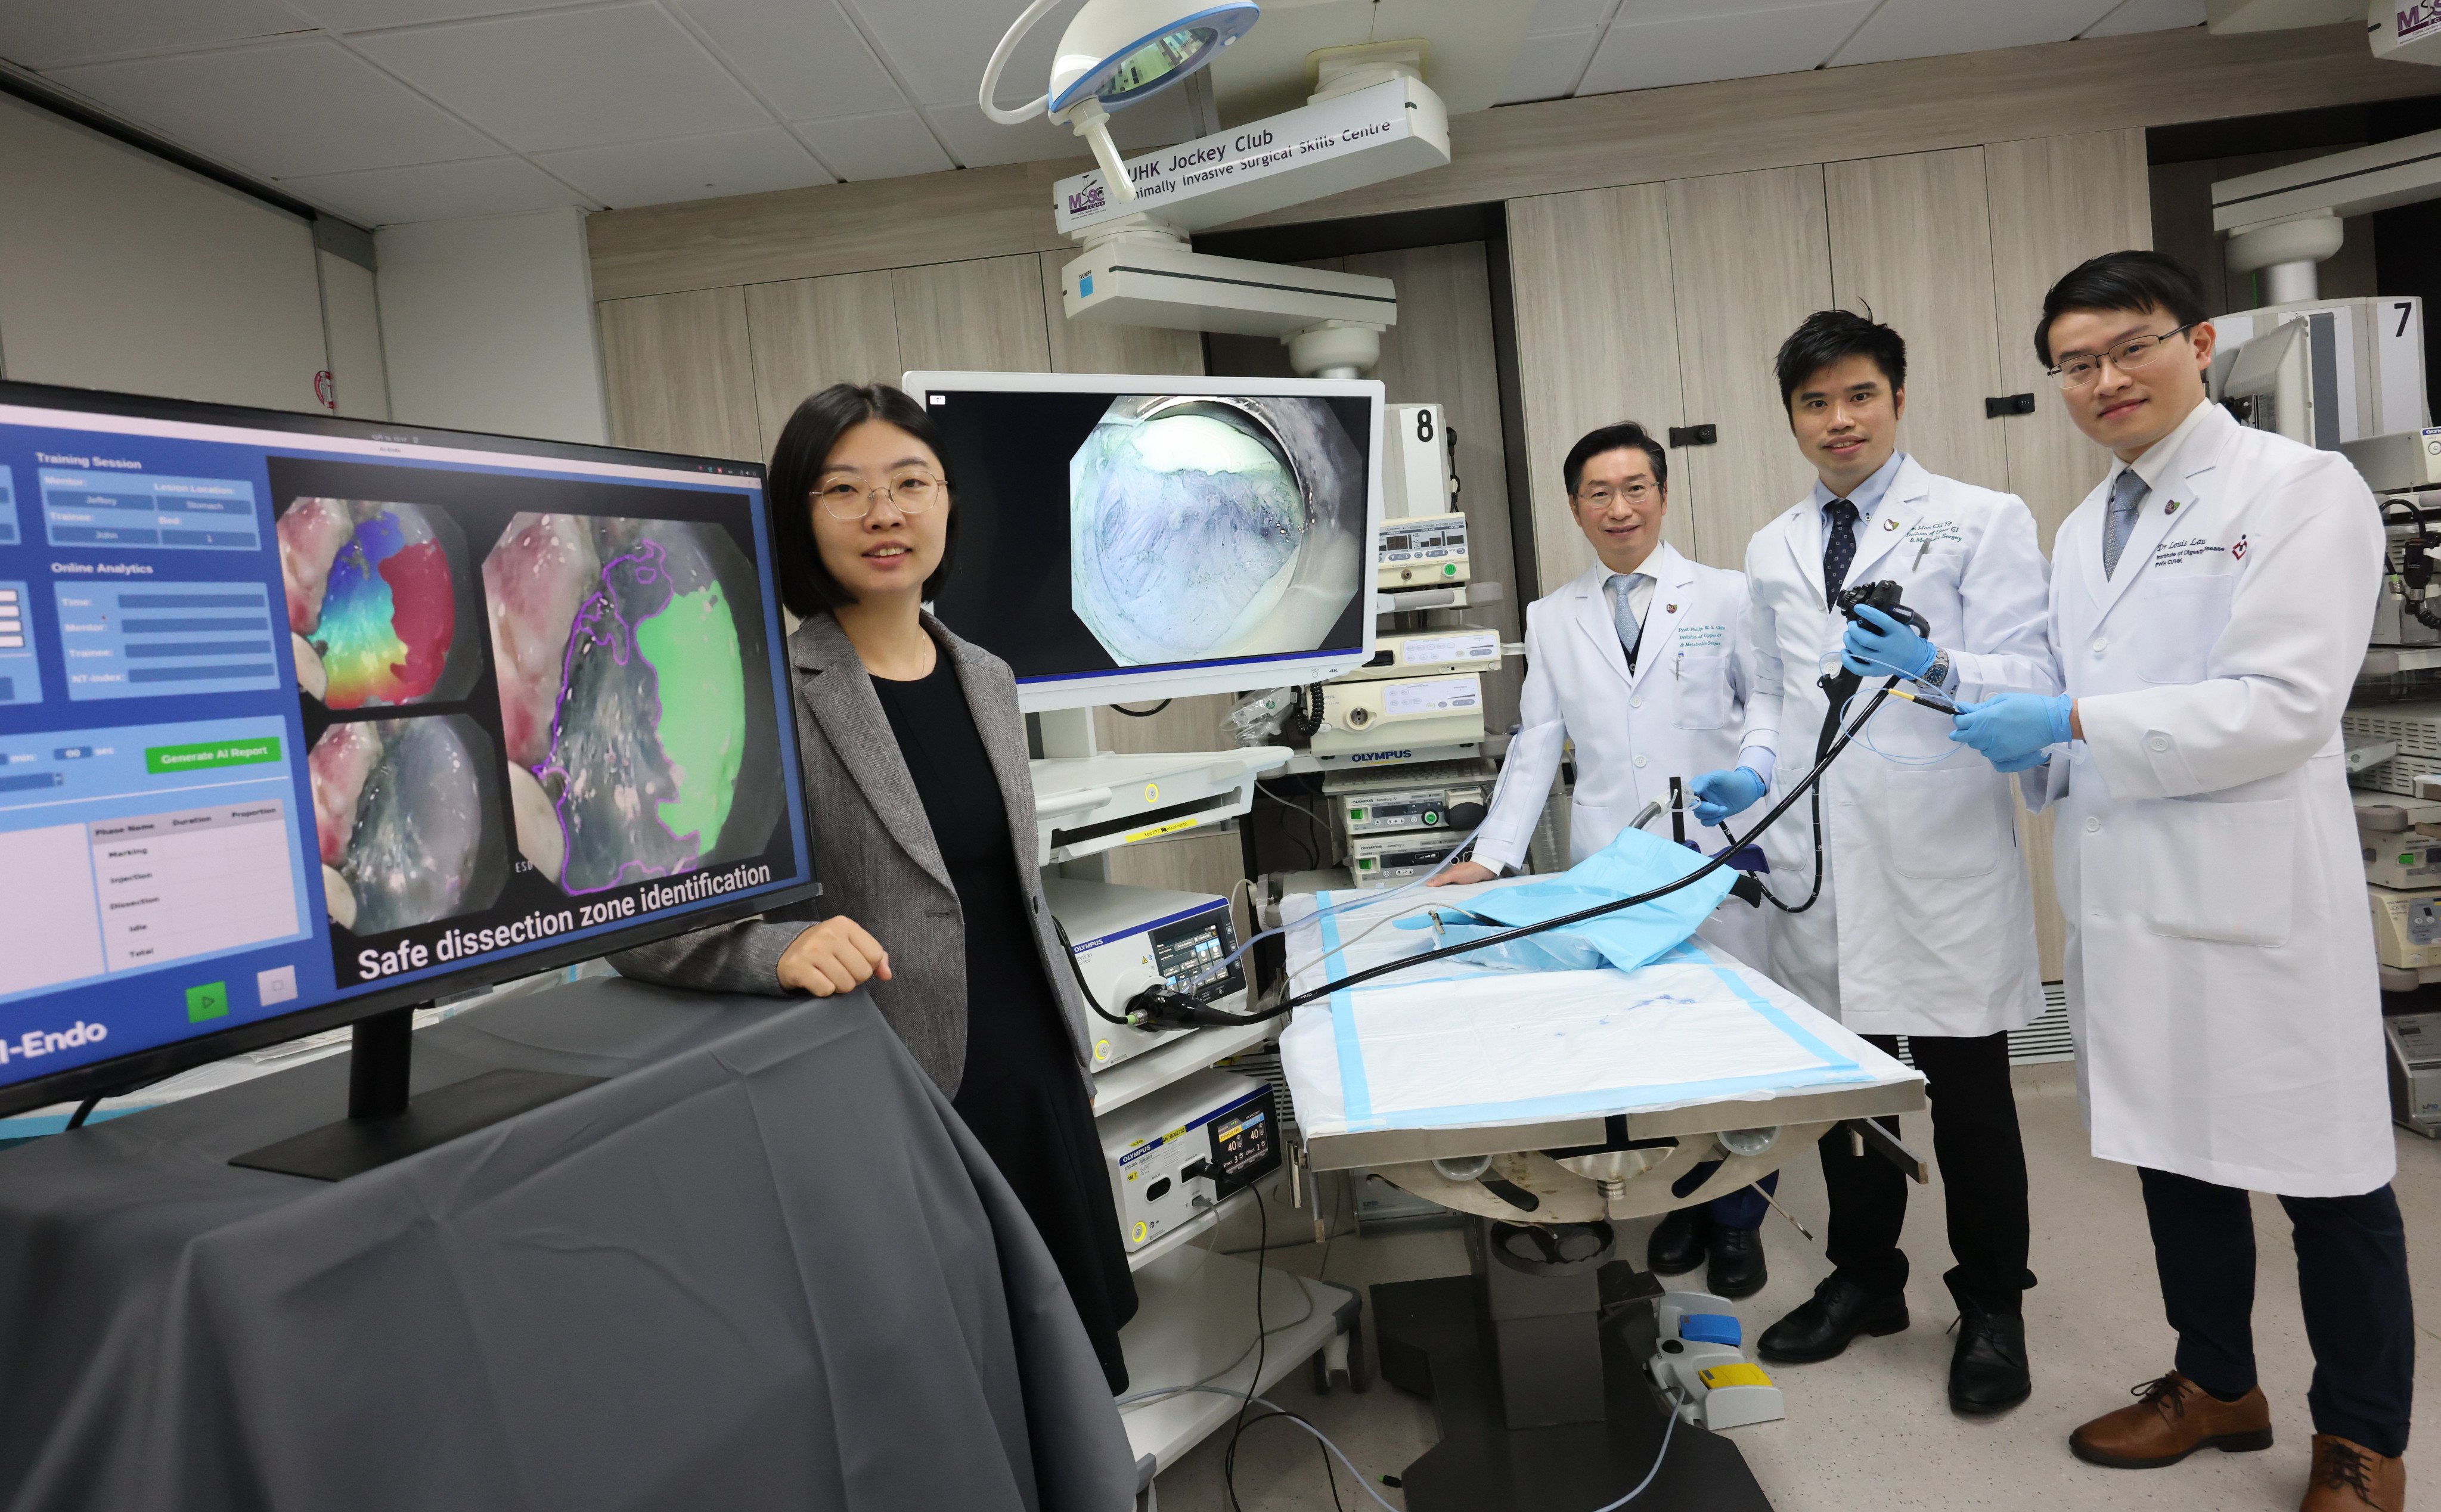 Representatives from the Chinese University of Hong Kong display surgical equipment. The research team aims to reduce the “miss rate” in spotting tumours. Photo: Jelly Tse